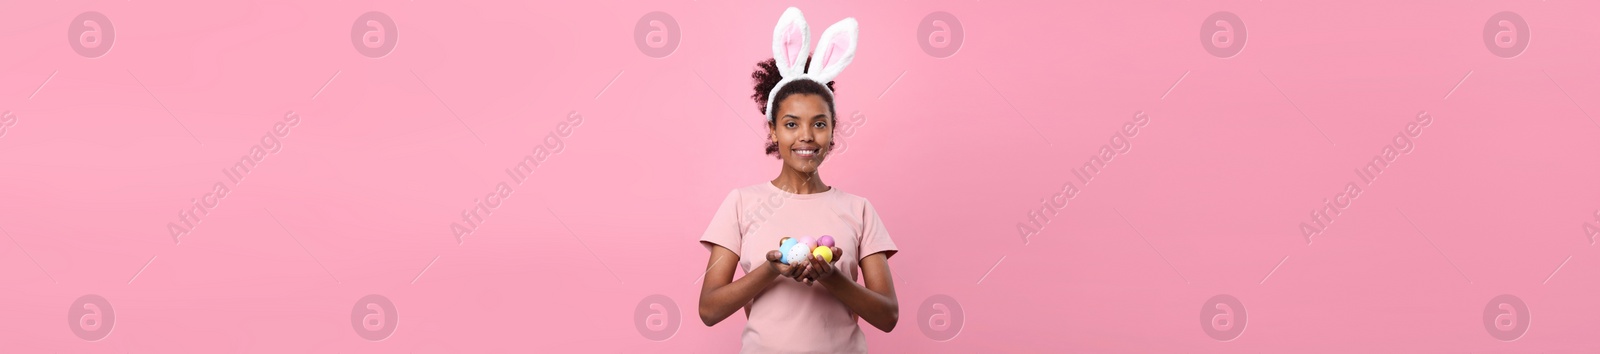 Image of African American woman with bunny ears holding Easter eggs on pink background. Banner design